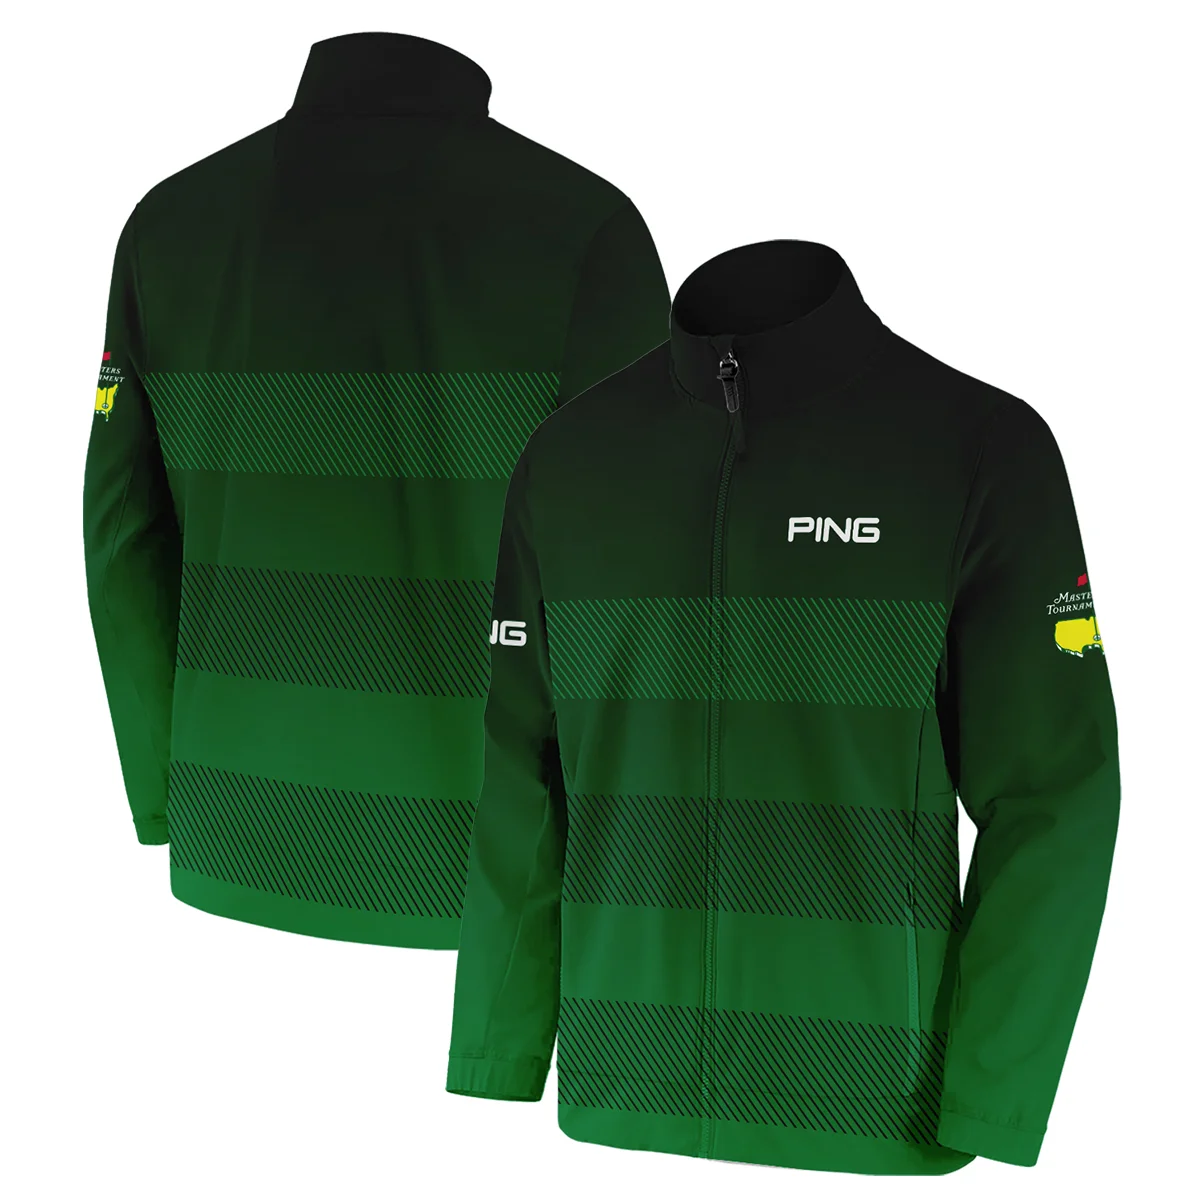 Masters Tournament Ping Sports Long Polo Shirt Green Gradient Stripes Pattern All Over Print Long Polo Shirt For Men